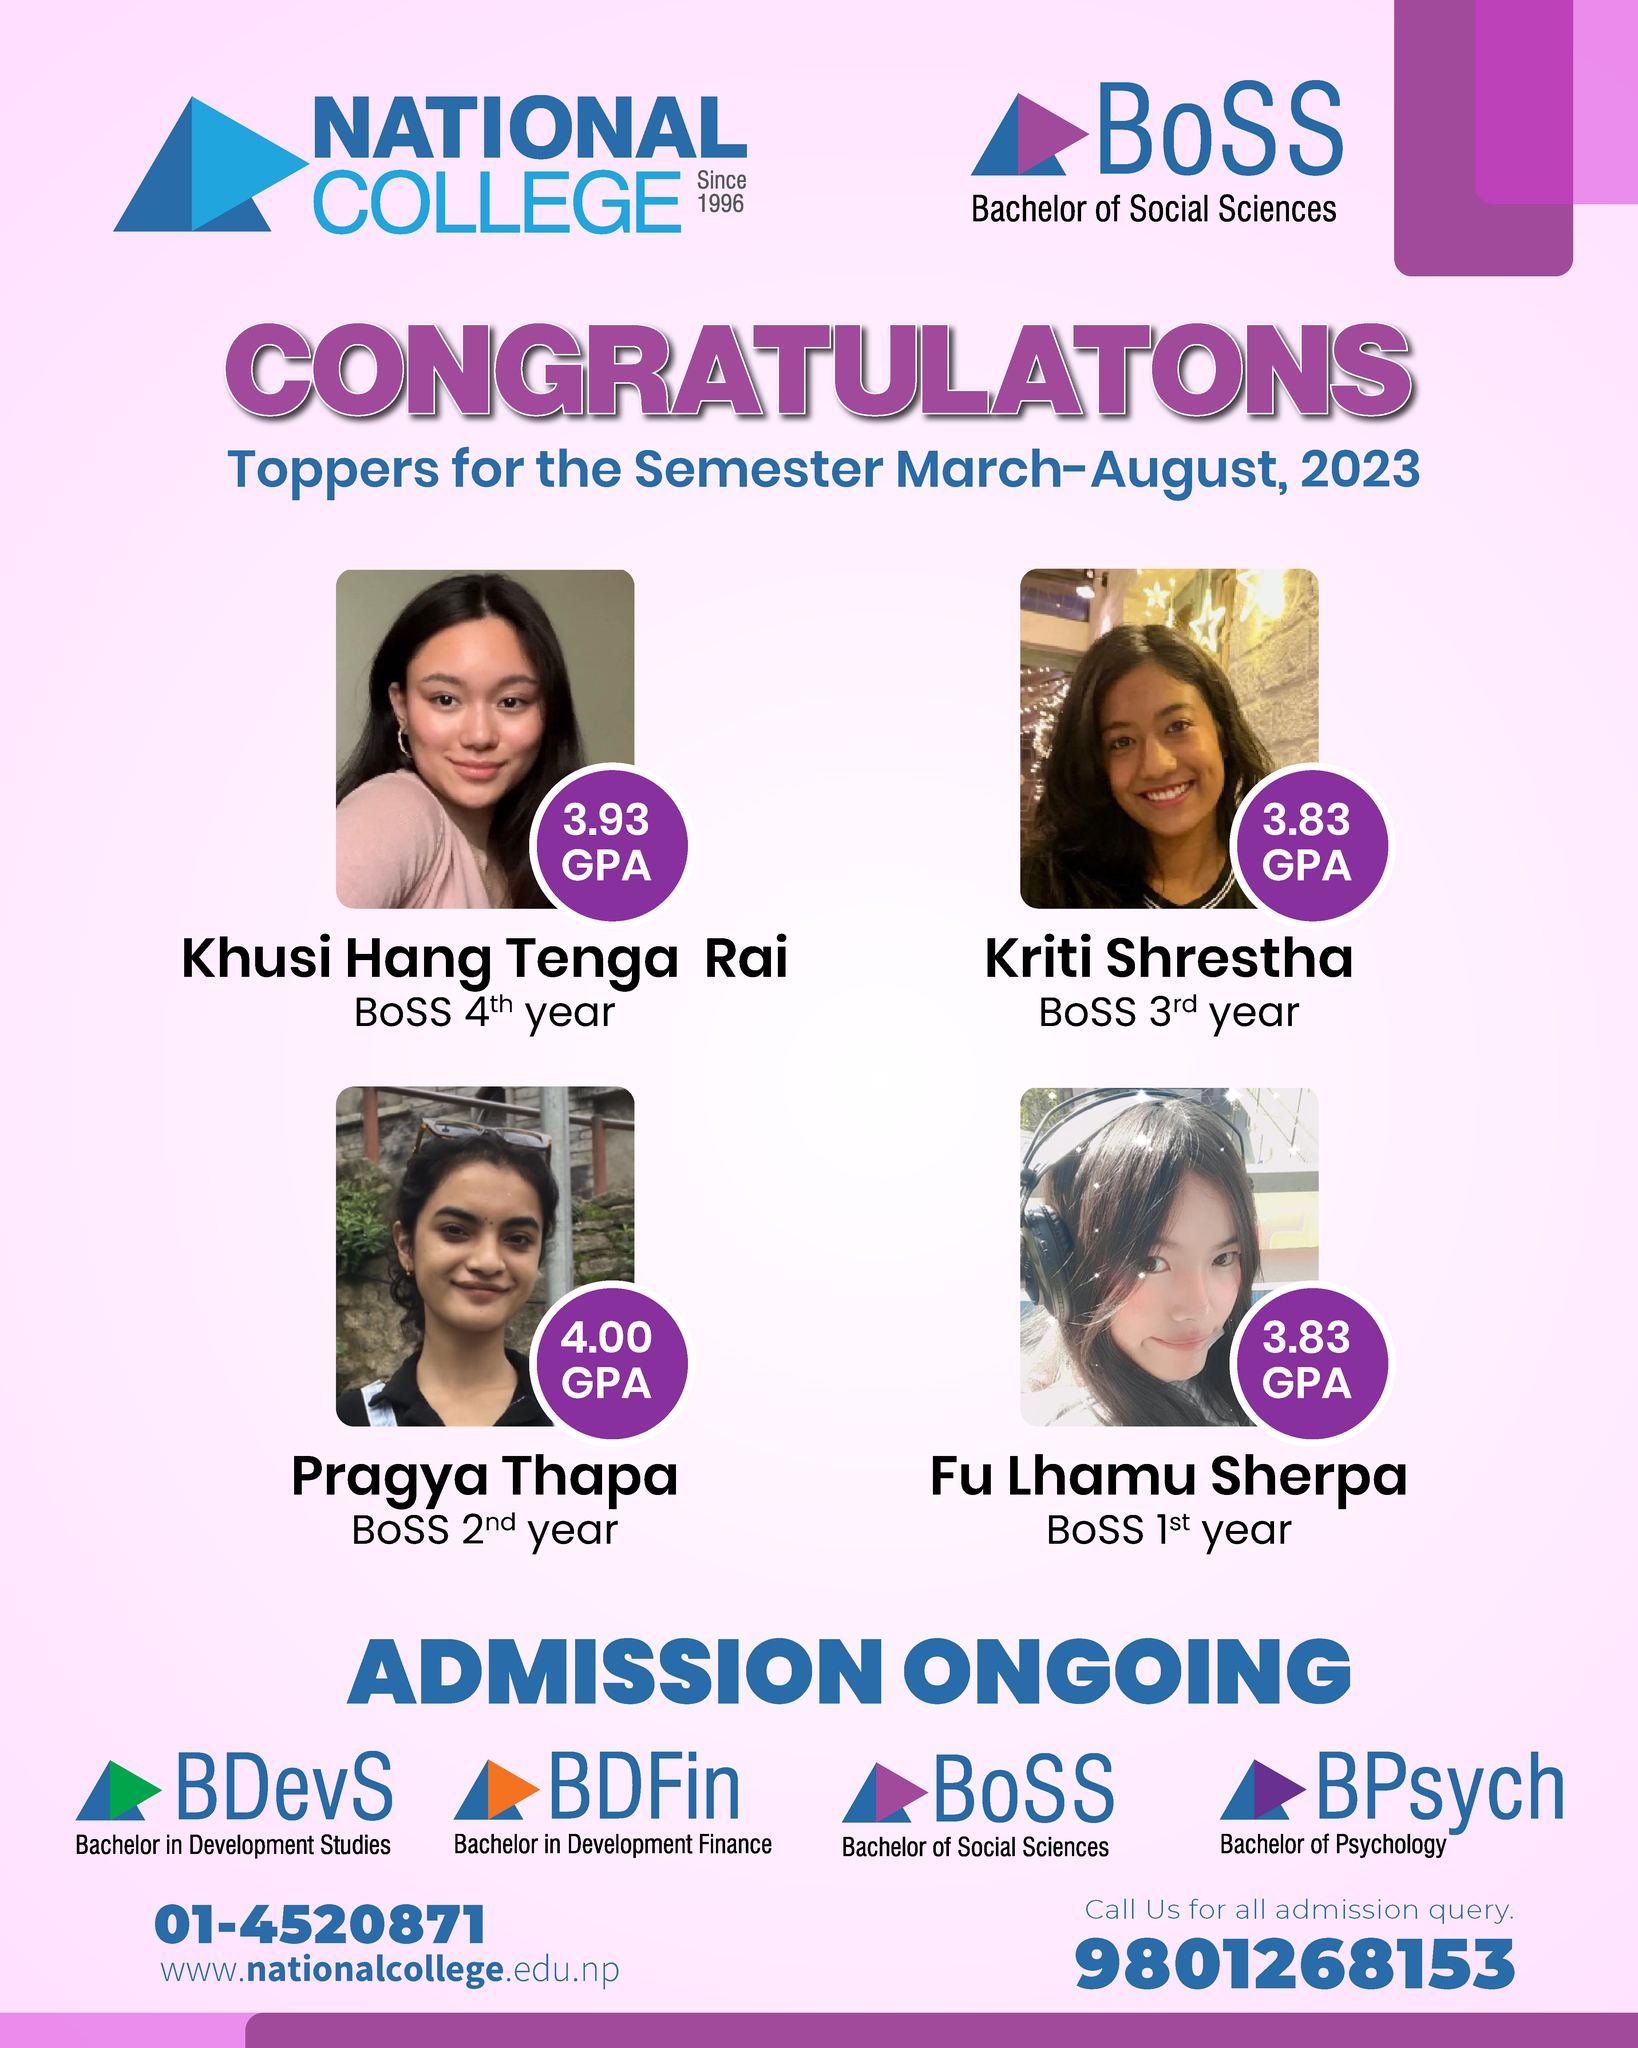 CONGRATULATONS Toppers for the Semester March-August, 2023 #BoSS